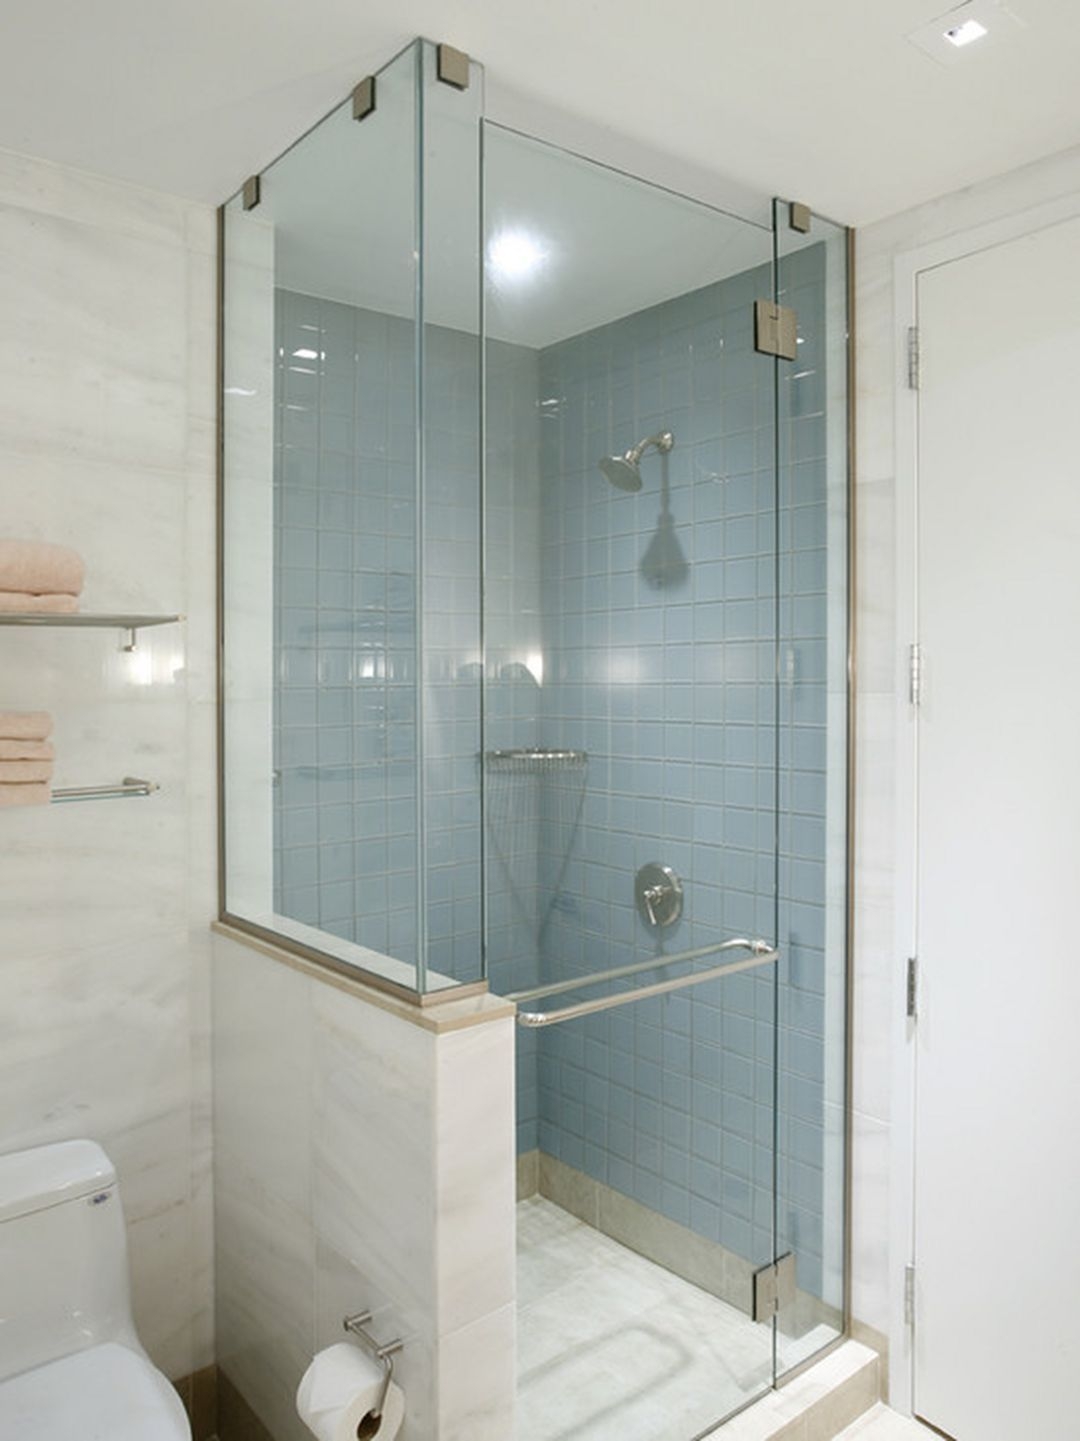 Small Bathroom Shower Stall Ideas / 75 Beautiful Small Bathroom Pictures Ideas August 2021 Houzz - Check out these great small shower ideas from interior designers to spice things up.